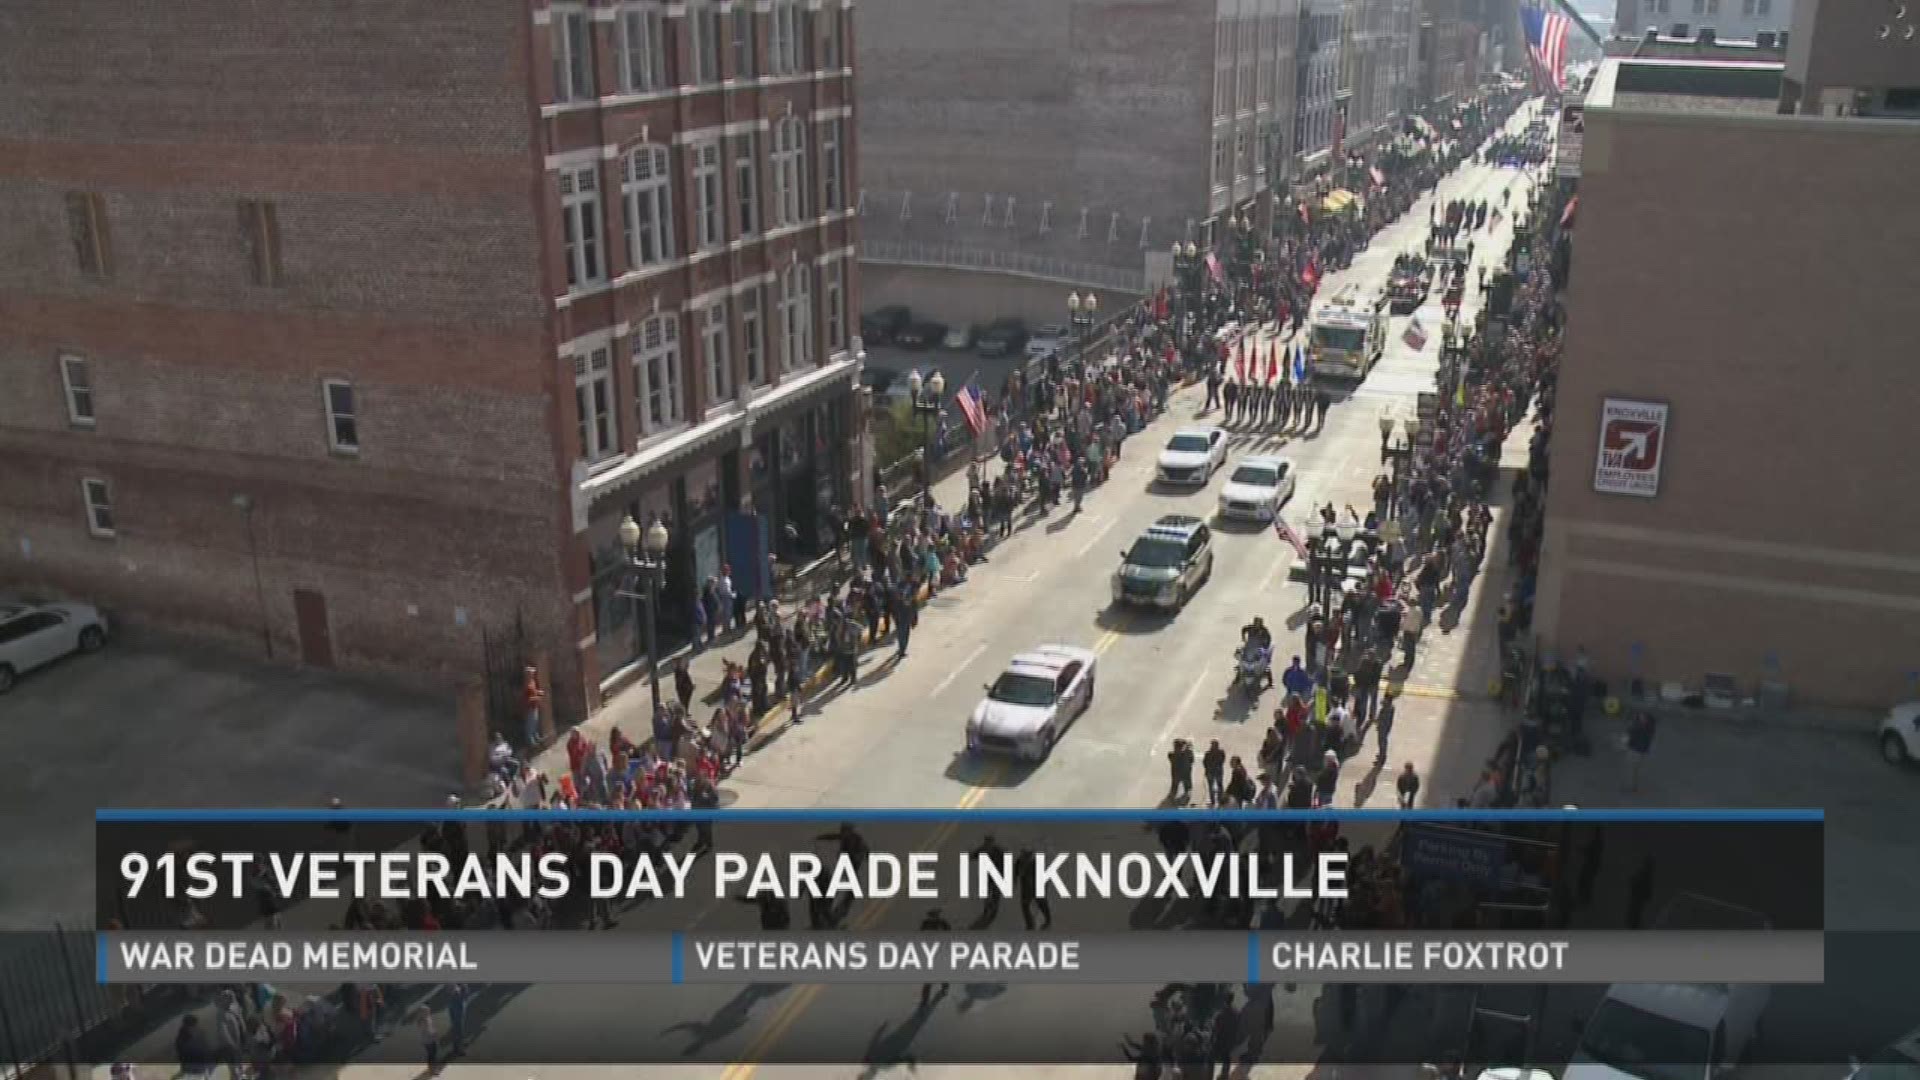 Knoxville hosted its 91st annual Veterans Day parade on Friday.